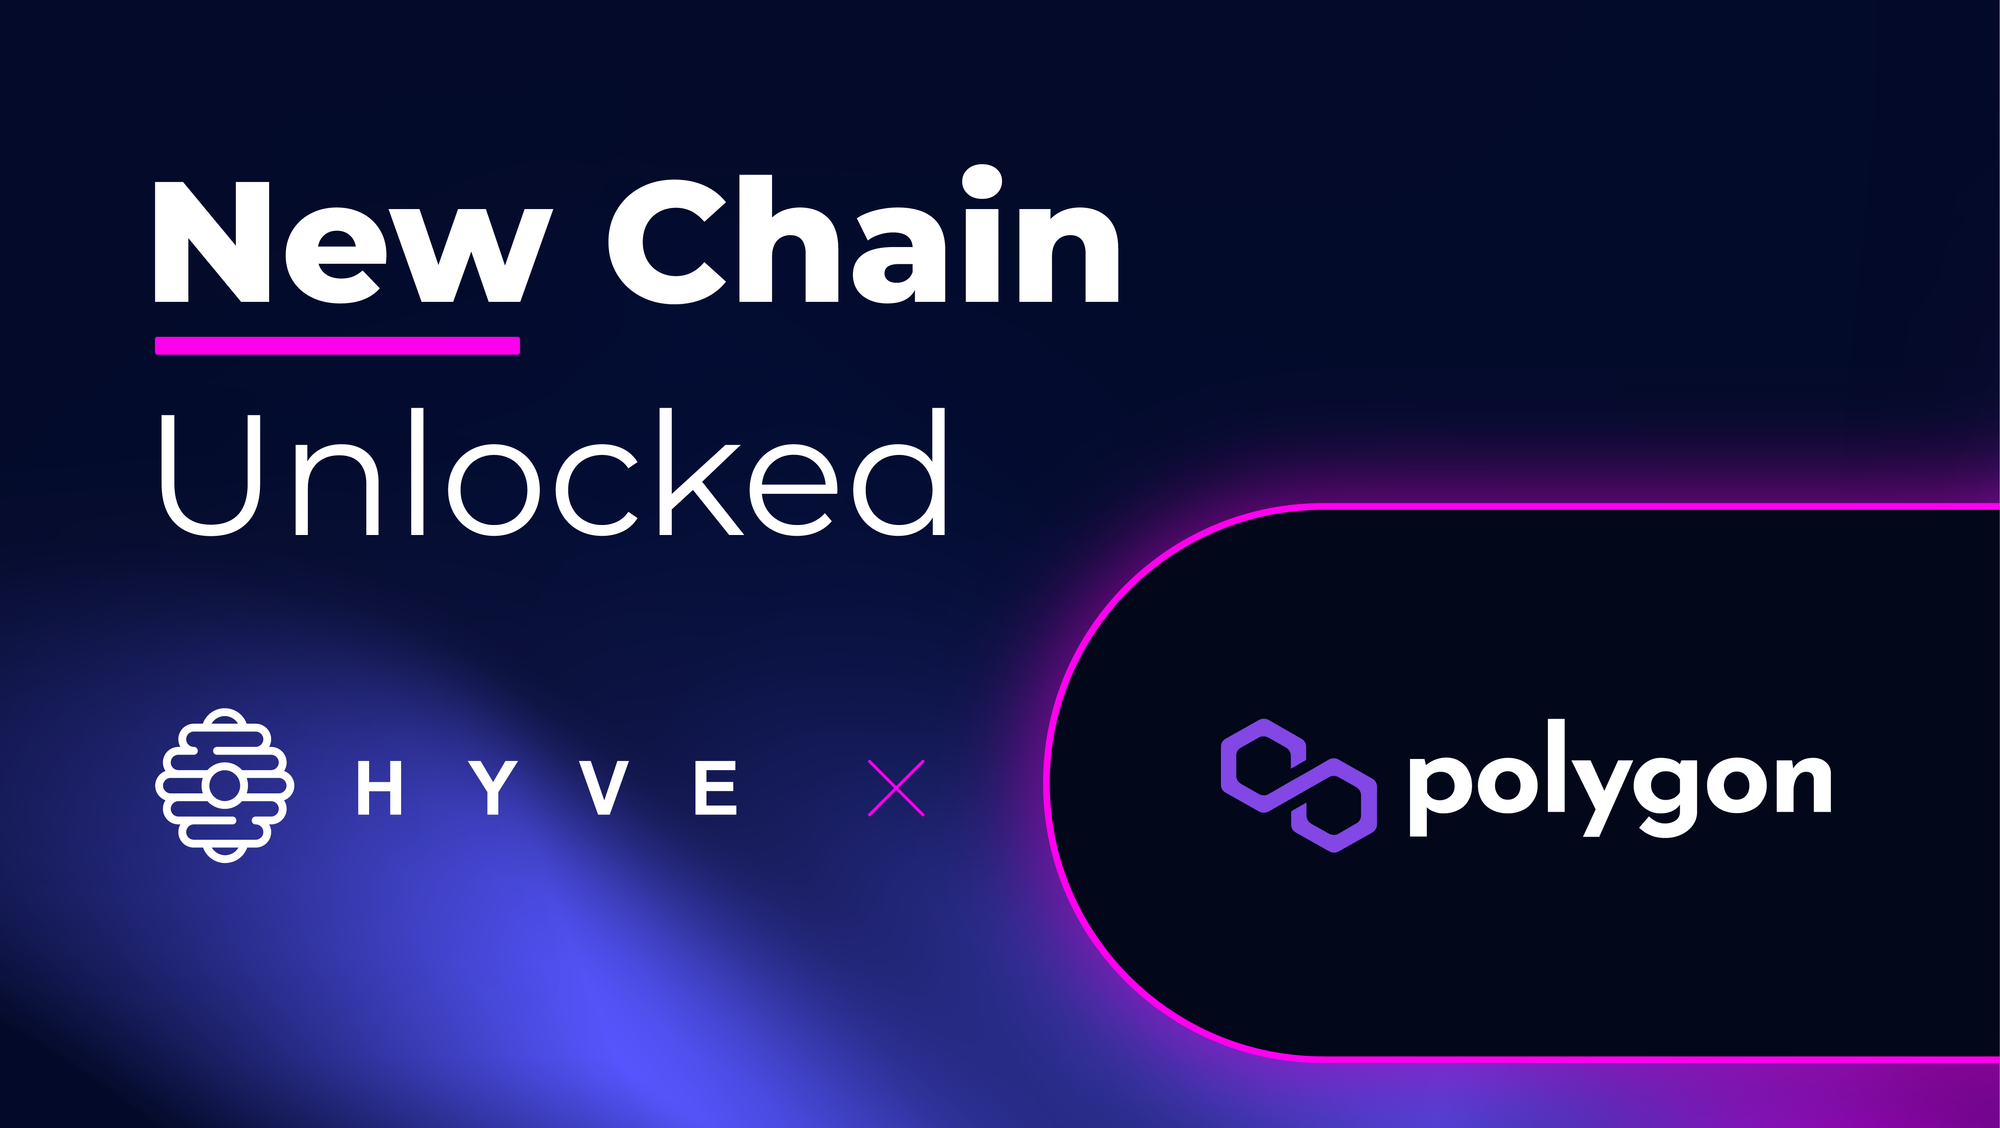 New Chain Integration: Polygon is now live on HYVE